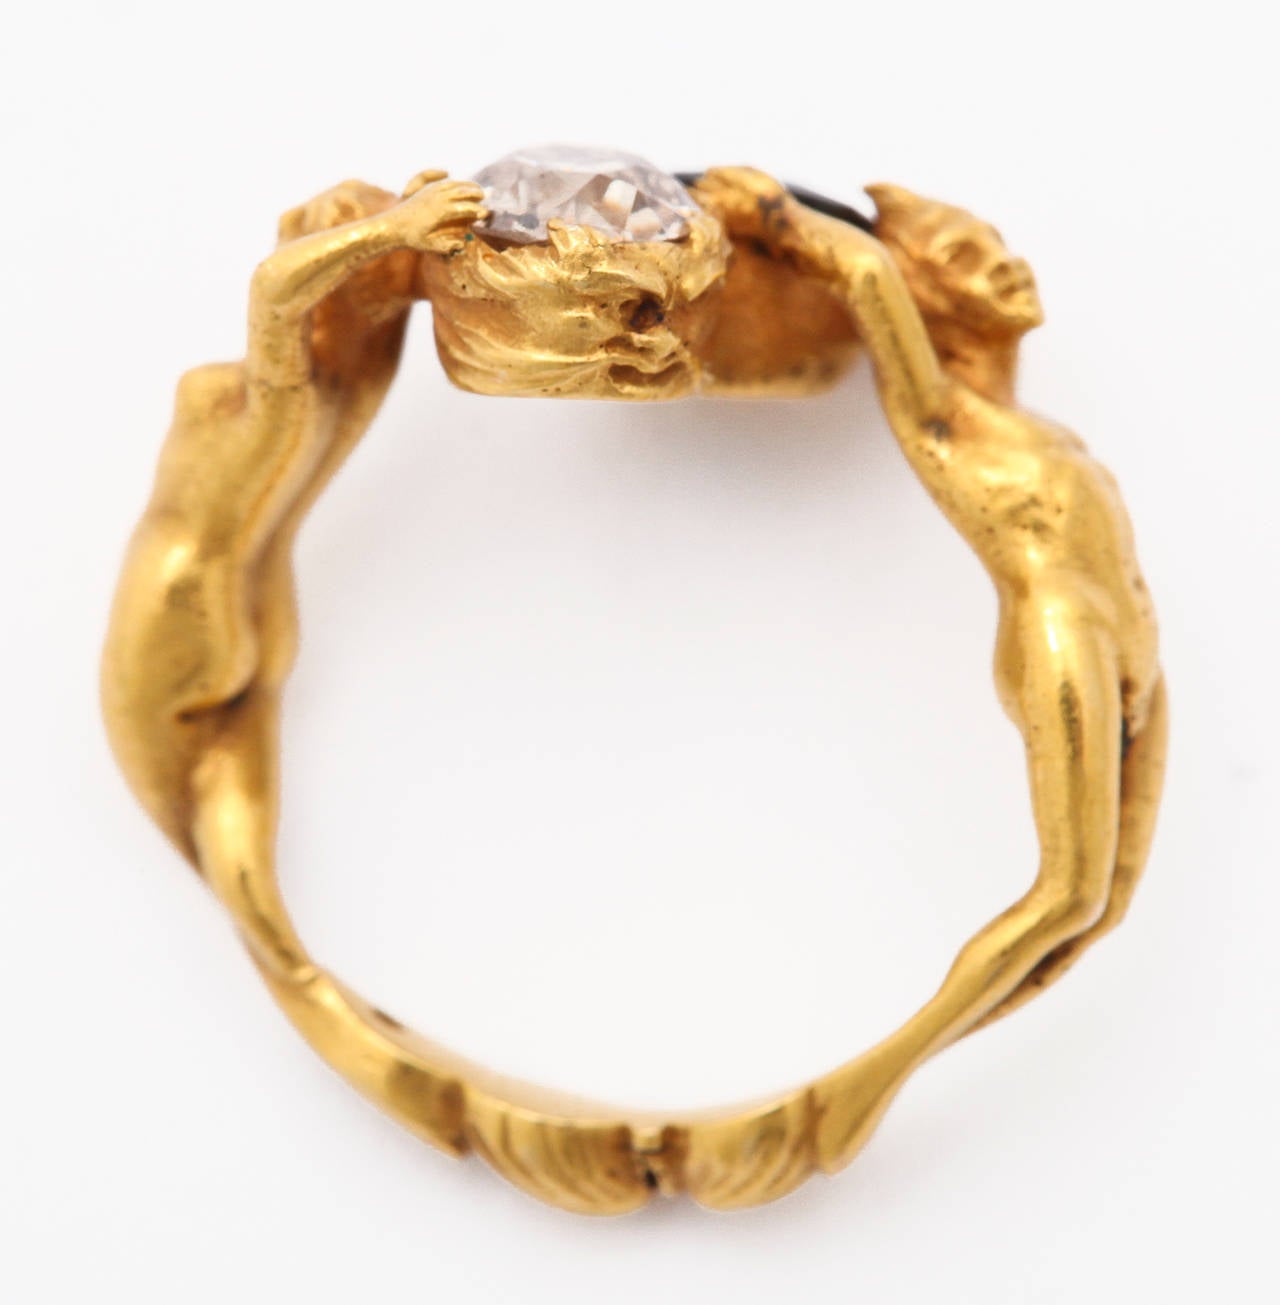 A beautifully detailed figural Art Nouveau ring of 18K gold comprised of a maiden holding a half carat diamond, and a faun character holding a deep blue  half carat sapphire. Unmarked. Fits a size finger size 3 1/2, but it would be easy to adjust